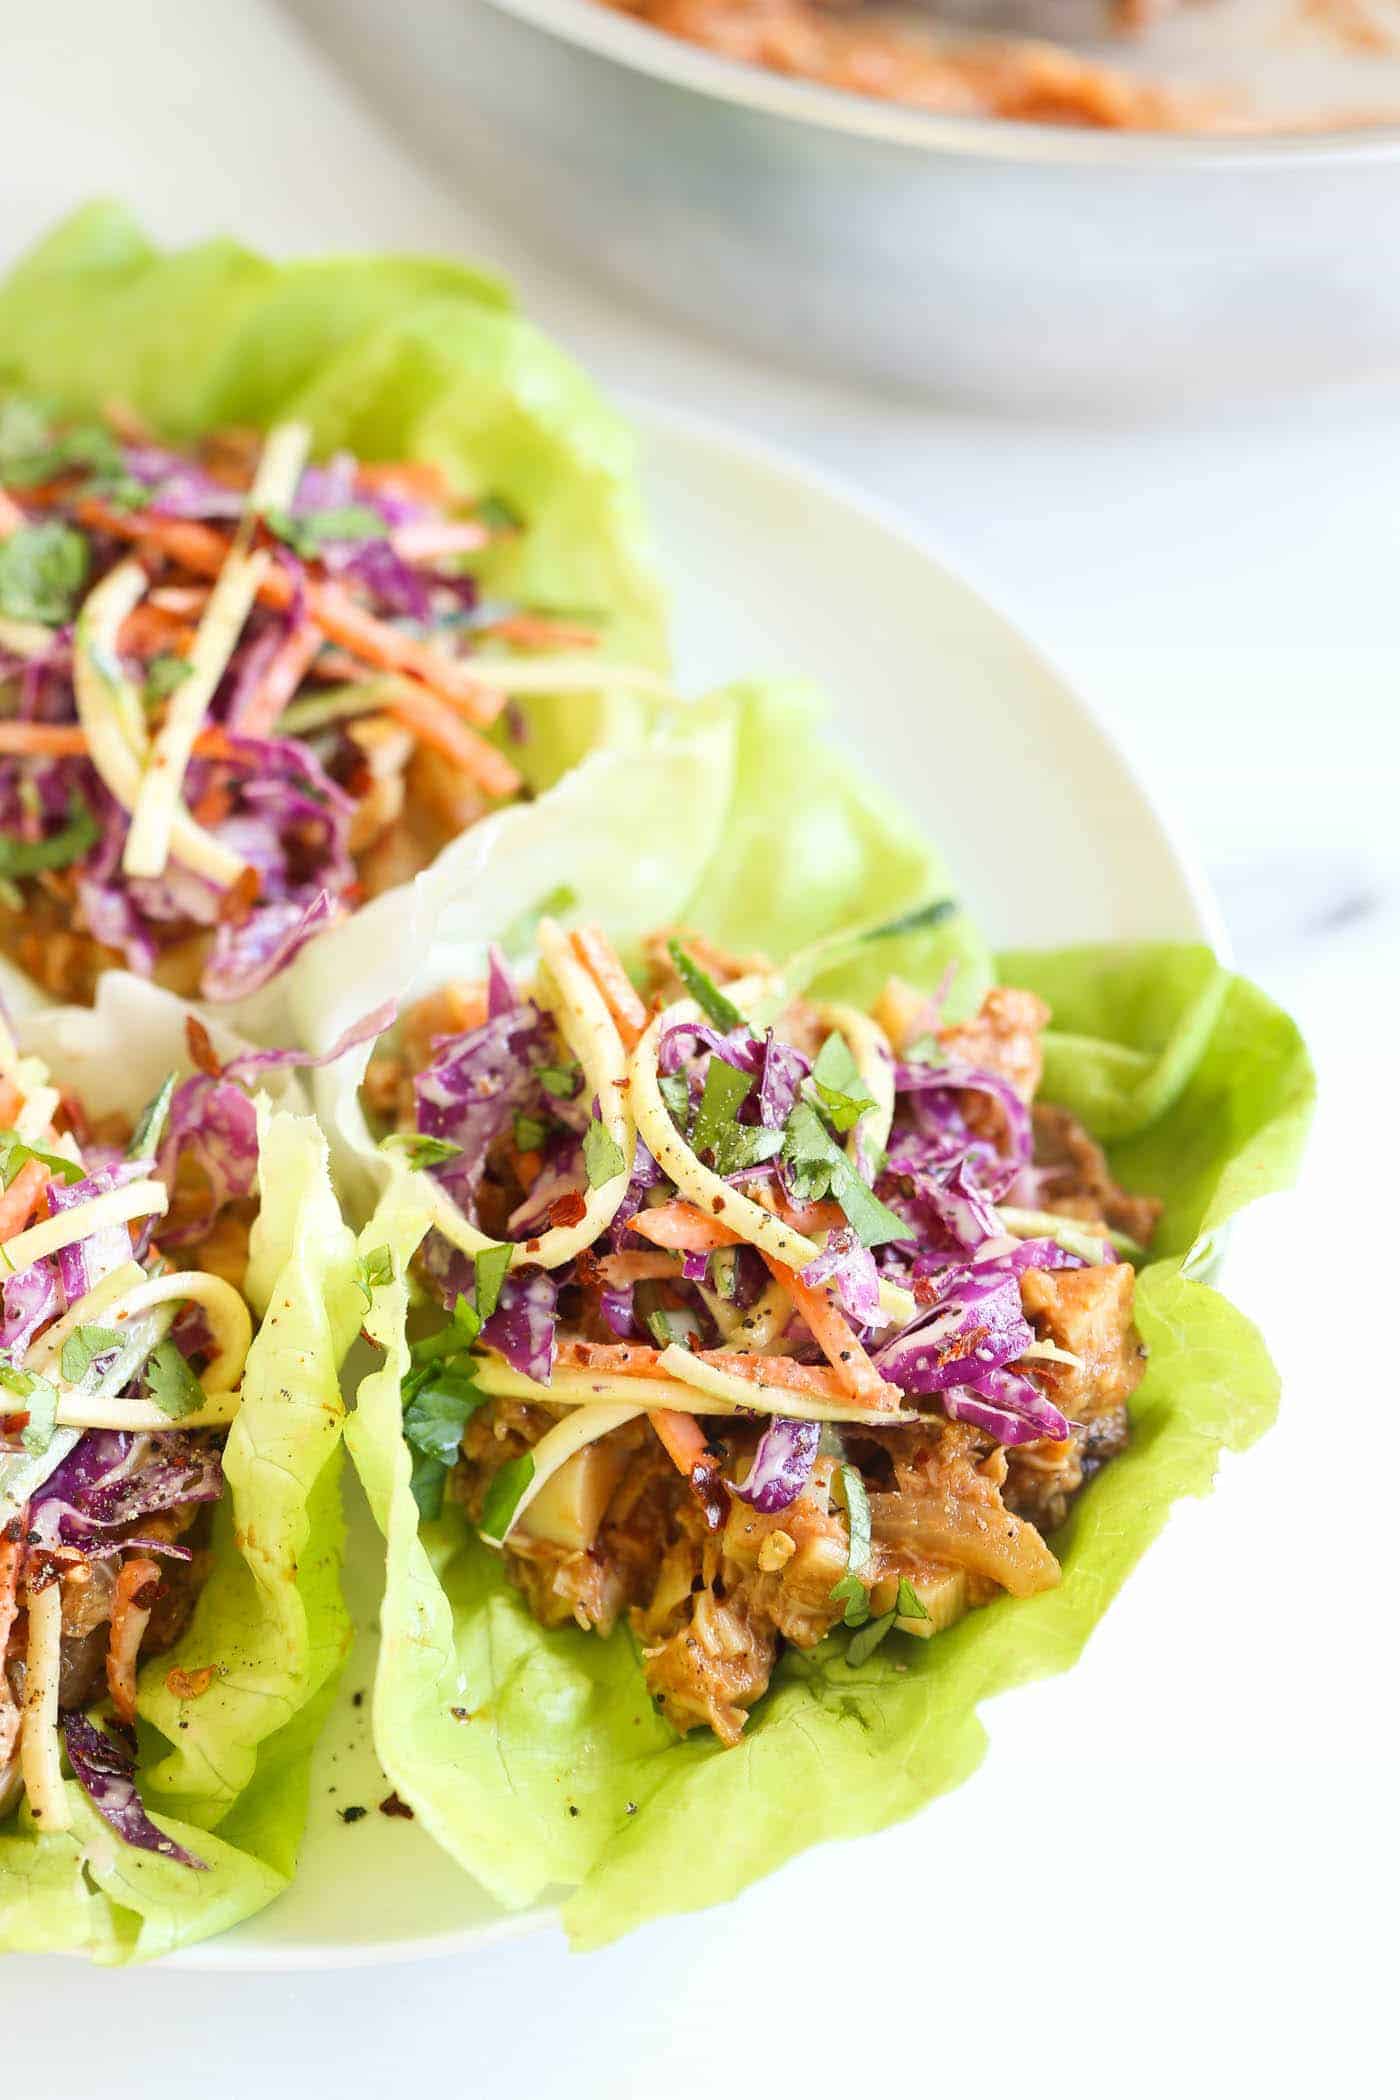 You'd never believe it, but these BBQ pulled pork lettuce wraps are actually VEGAN! 